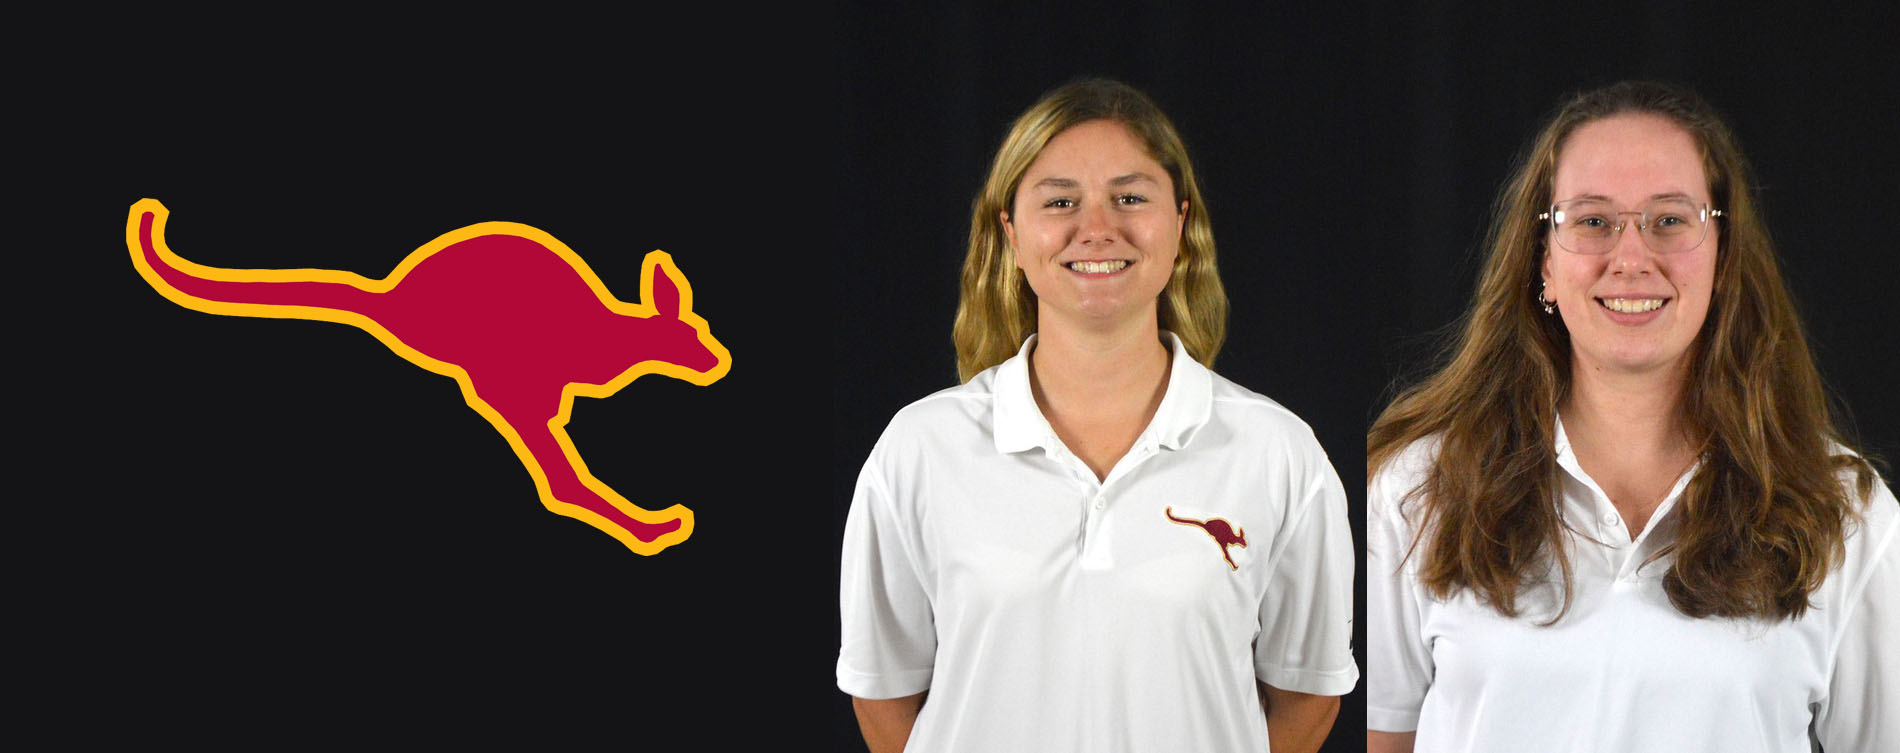 Olivier, Pasky Earn CWPA Accolades